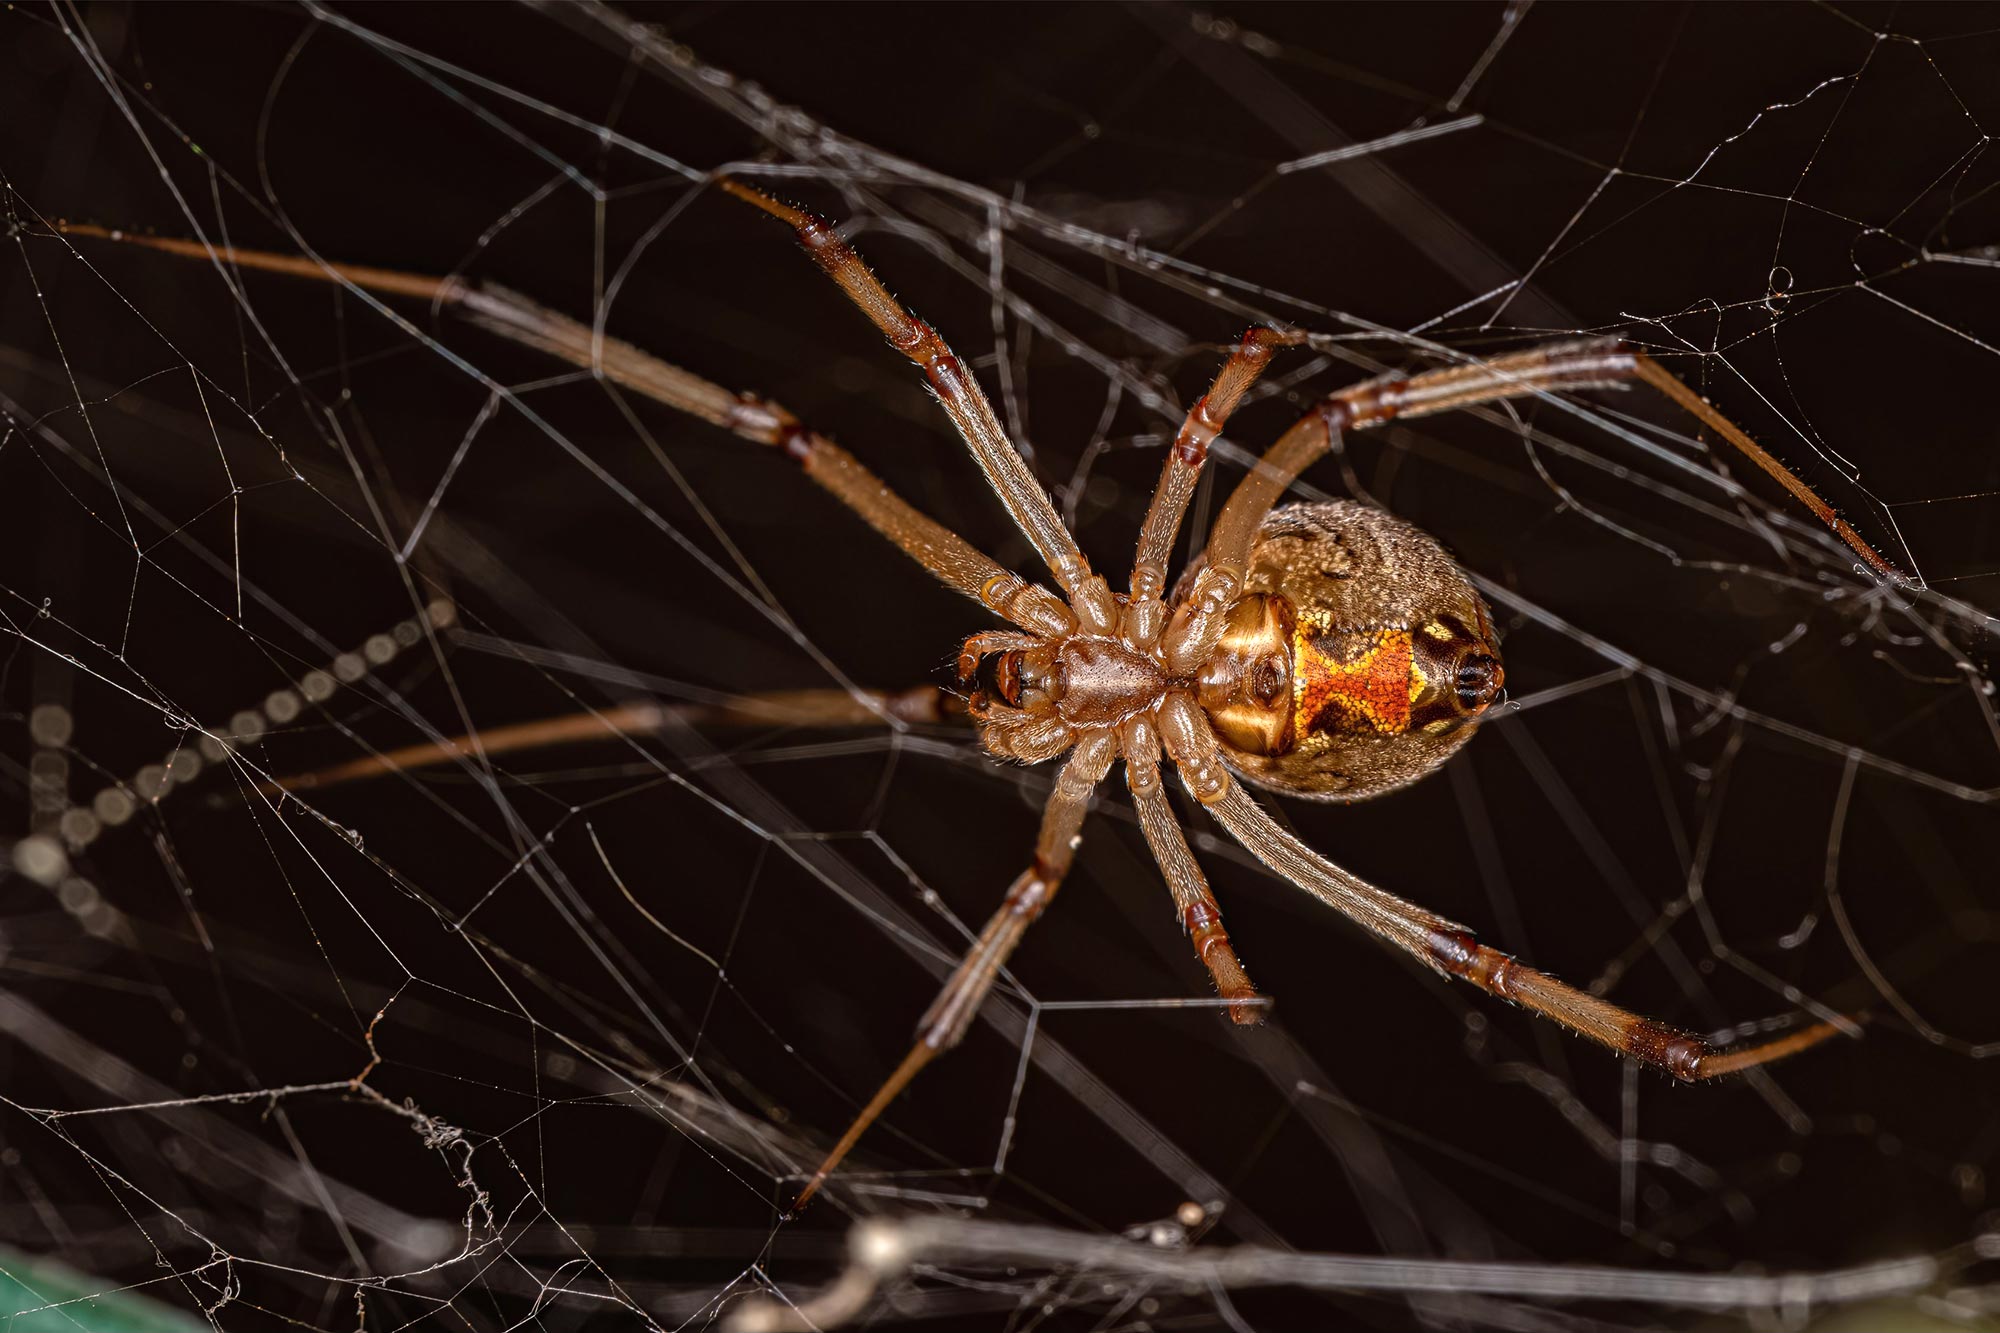 Black widows are being killed off by non-native brown widows